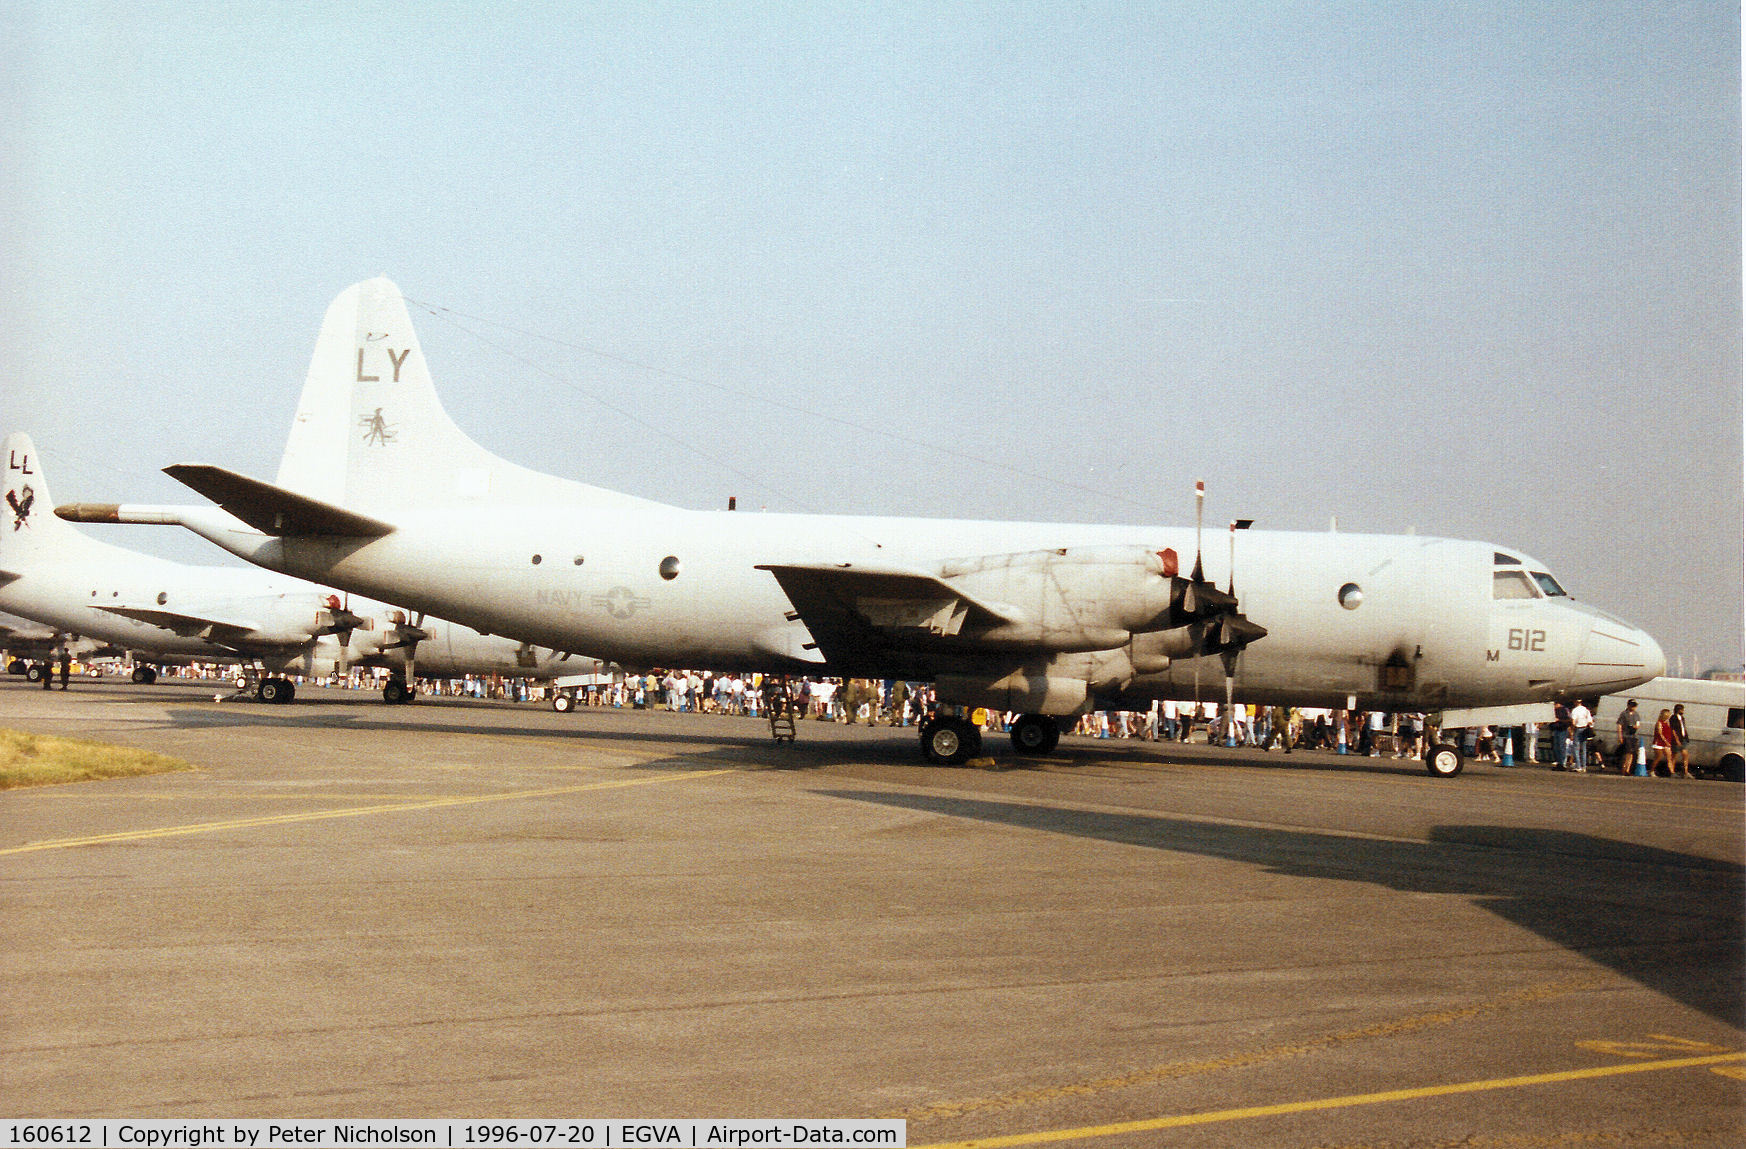 160612, Lockheed P-3C Orion C/N 285A-5663, P-3C Orion of Patrol Squadron VP-92 at Naval Air Station Brunswick on display at the 1996 Royal Intnl Air Tattoo at RAF Fairford.